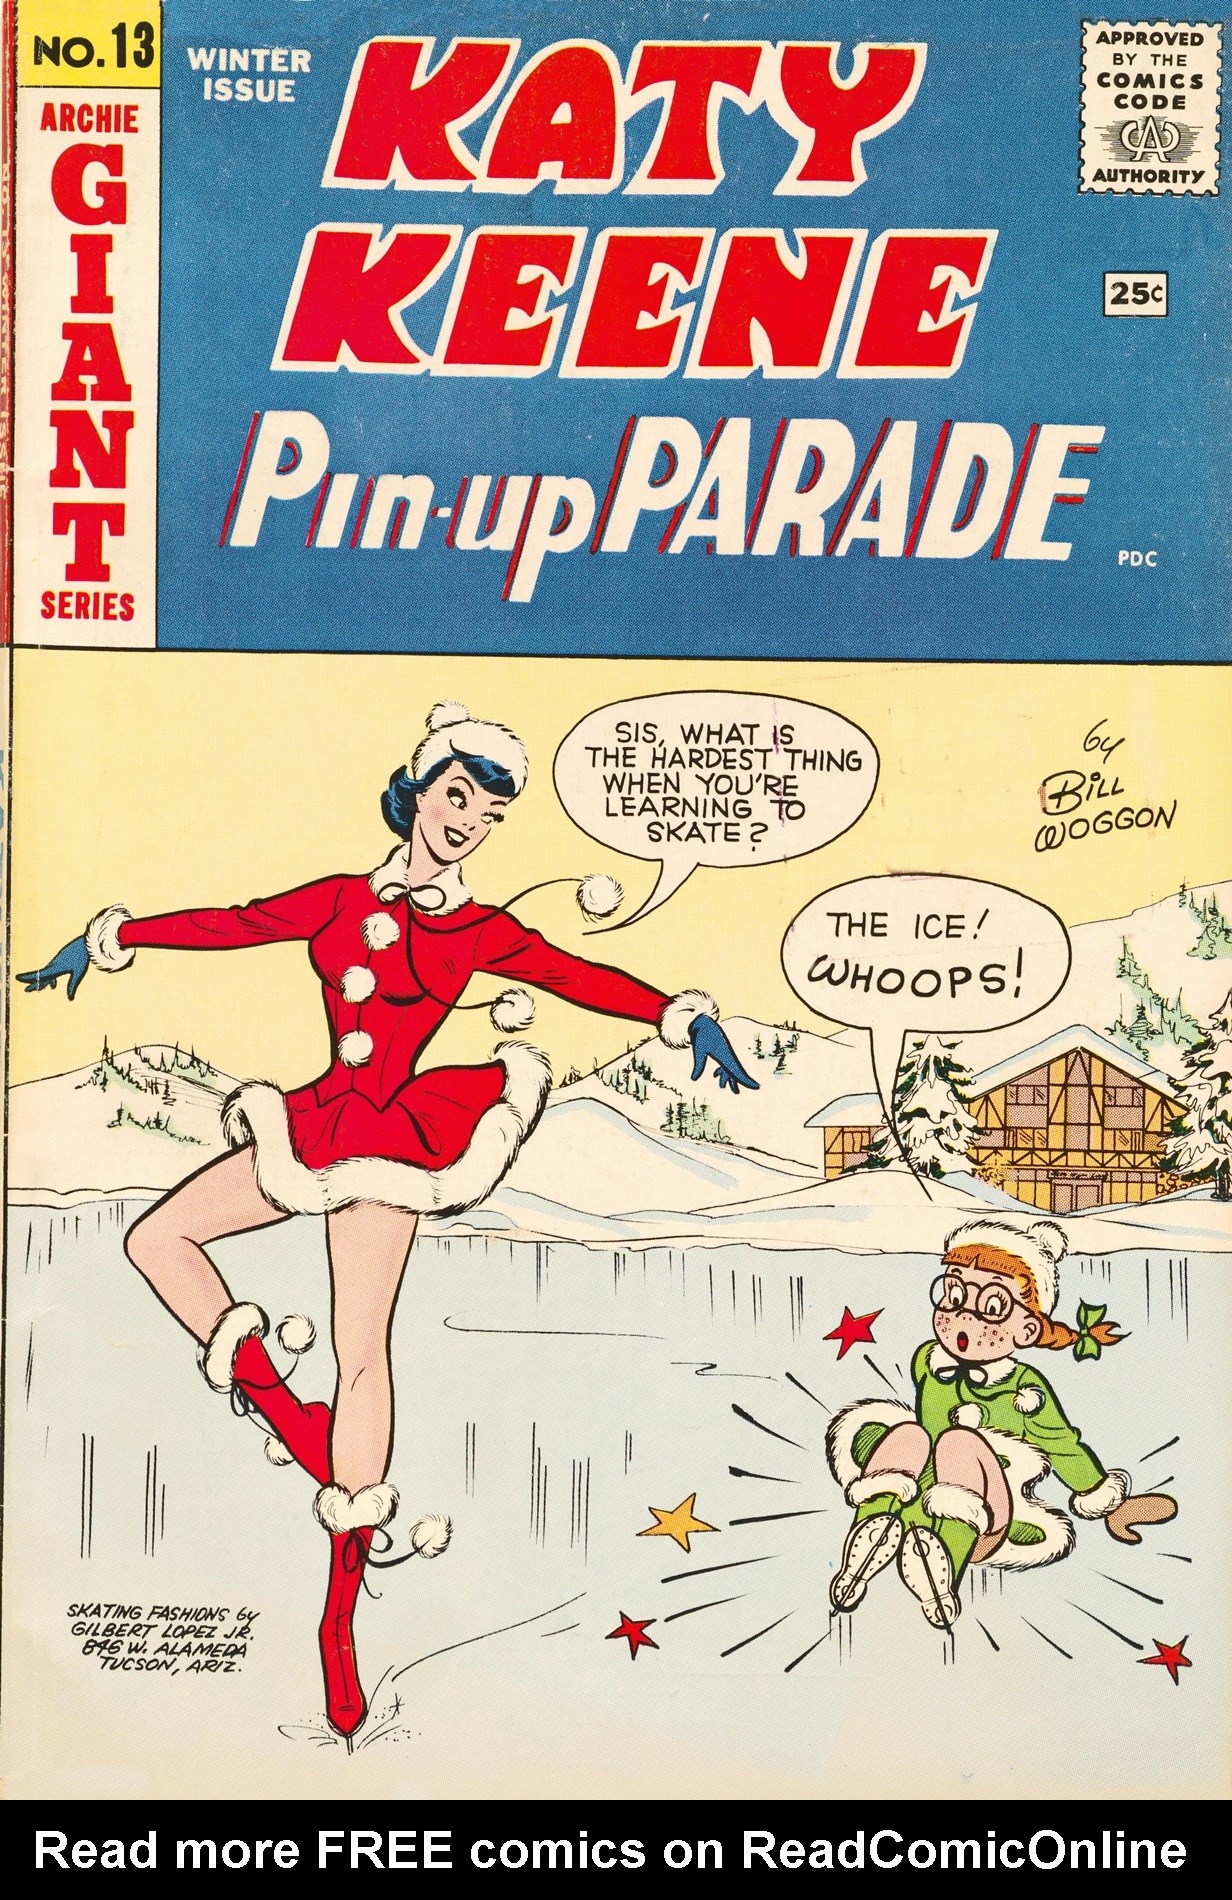 Read online Katy Keene Pin-up Parade comic -  Issue #13 - 1